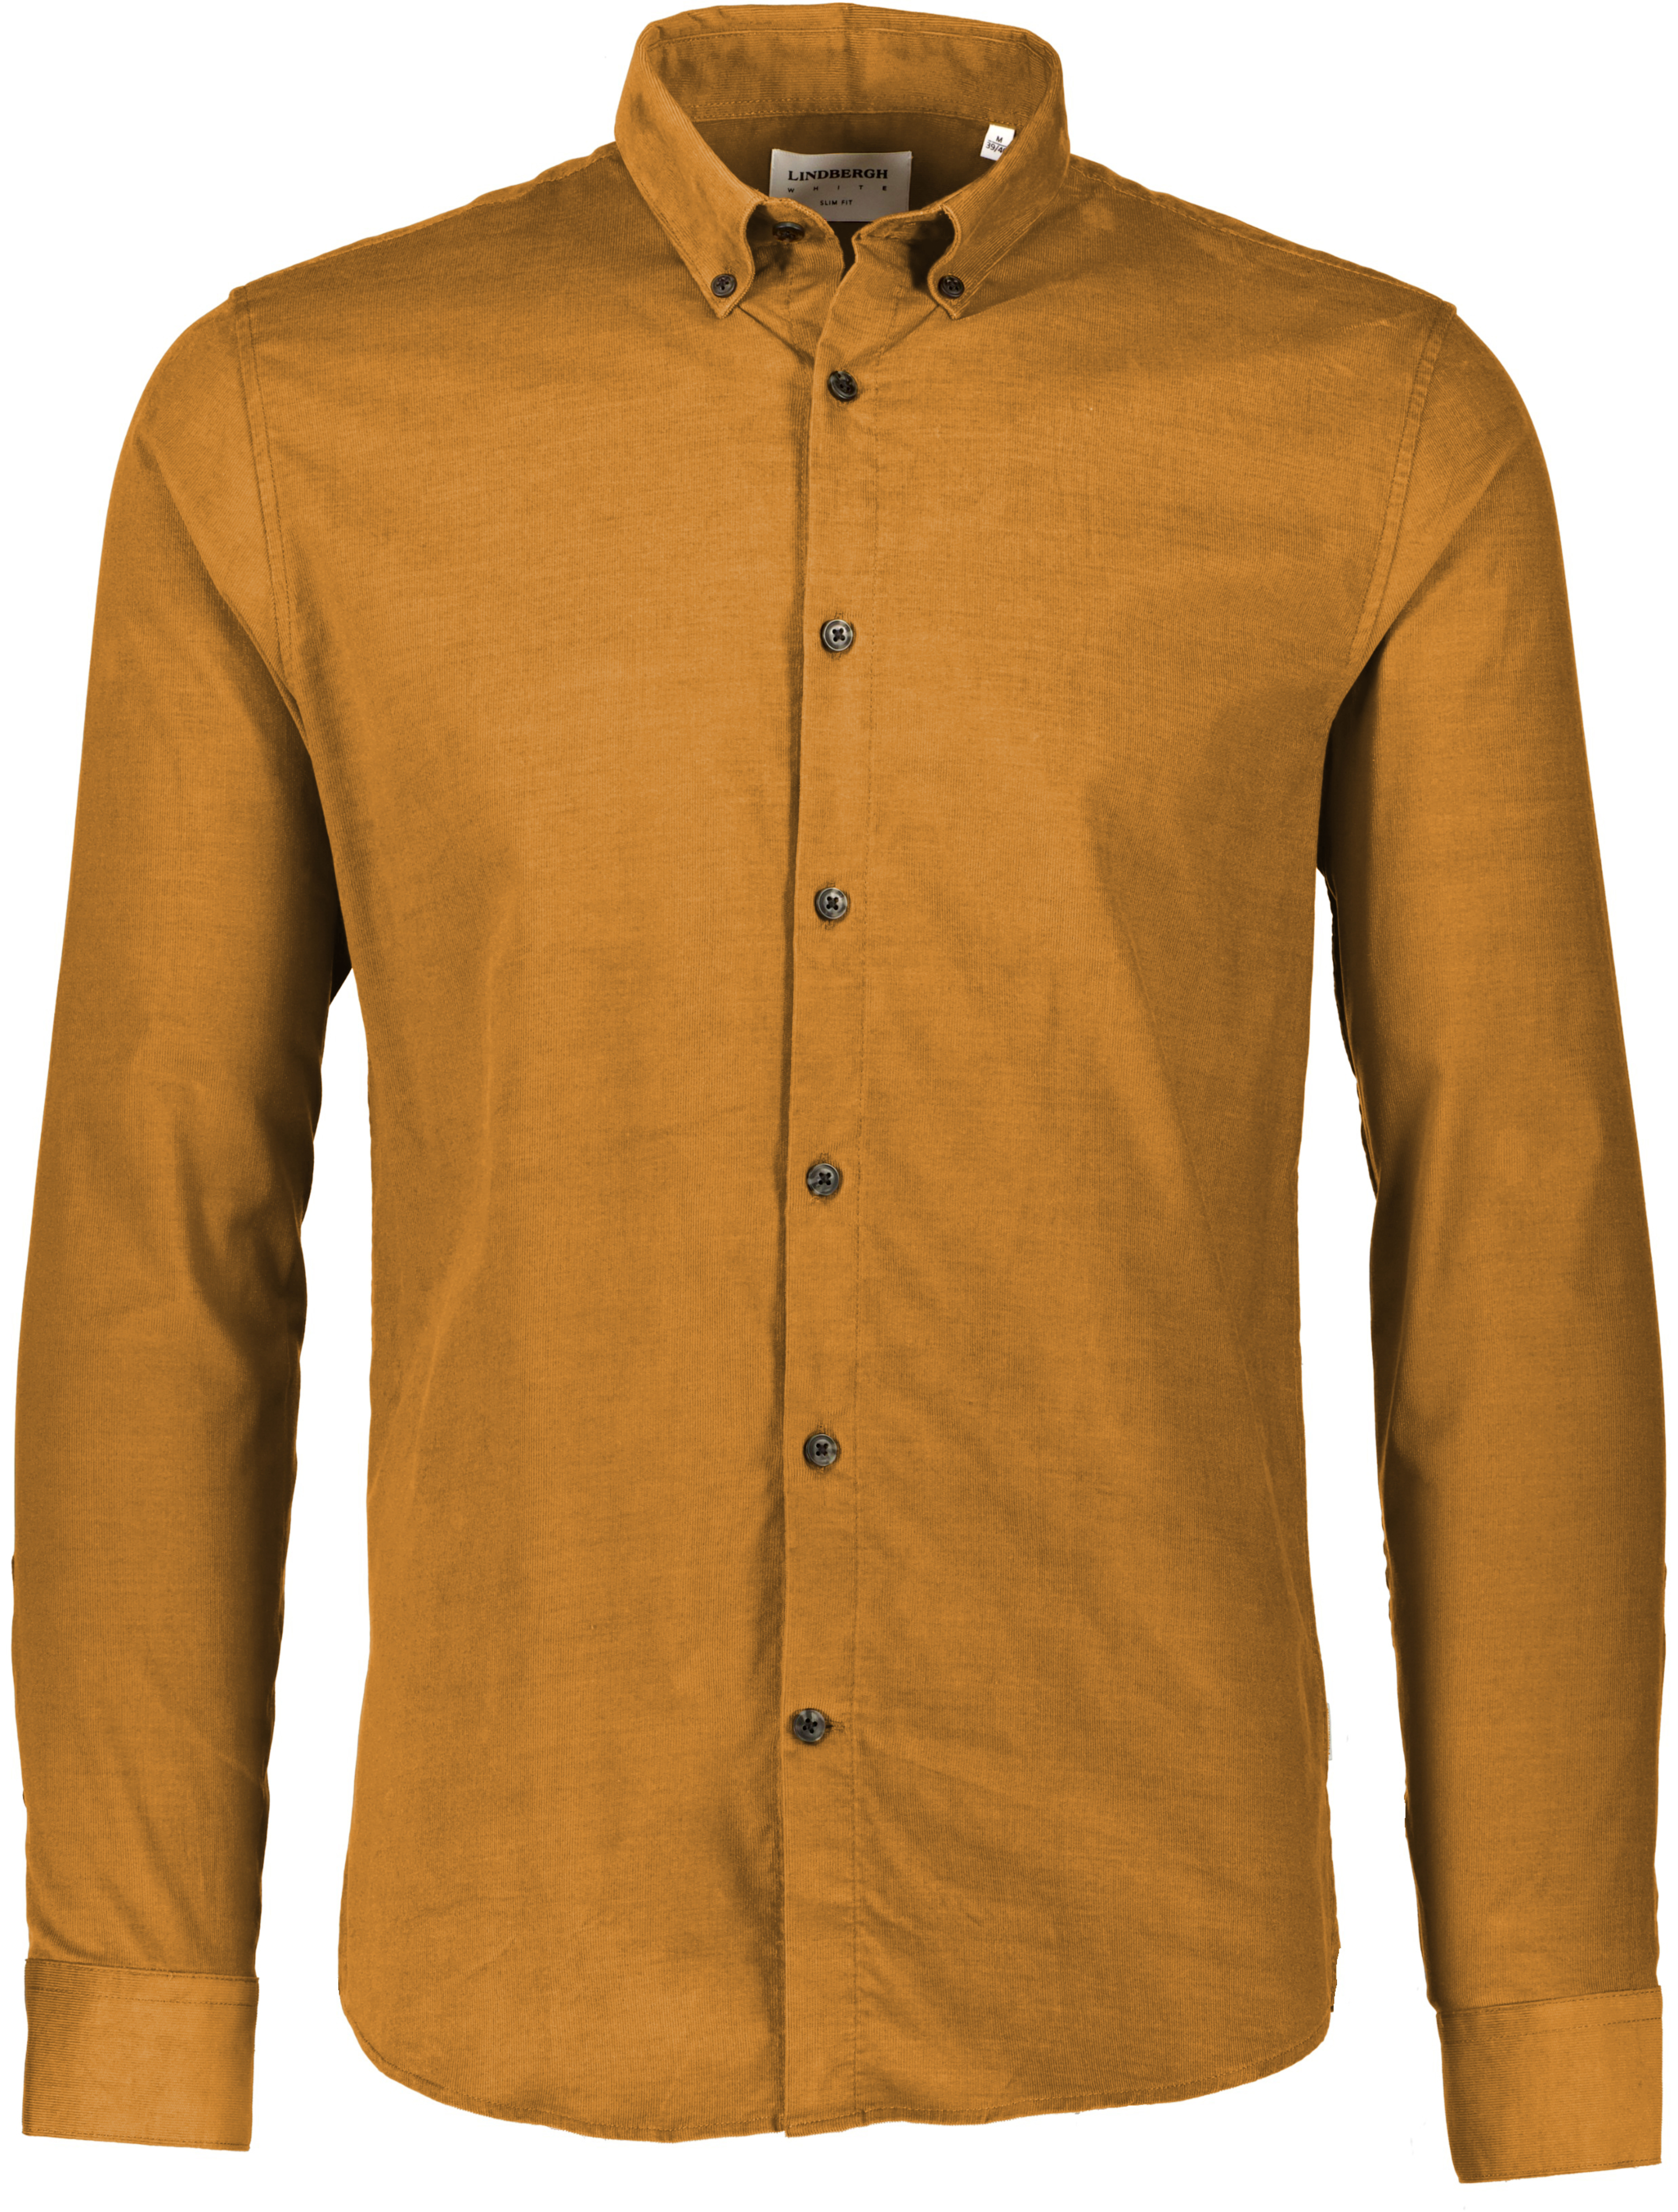 Lindbergh Business casual shirt brown / mid brown